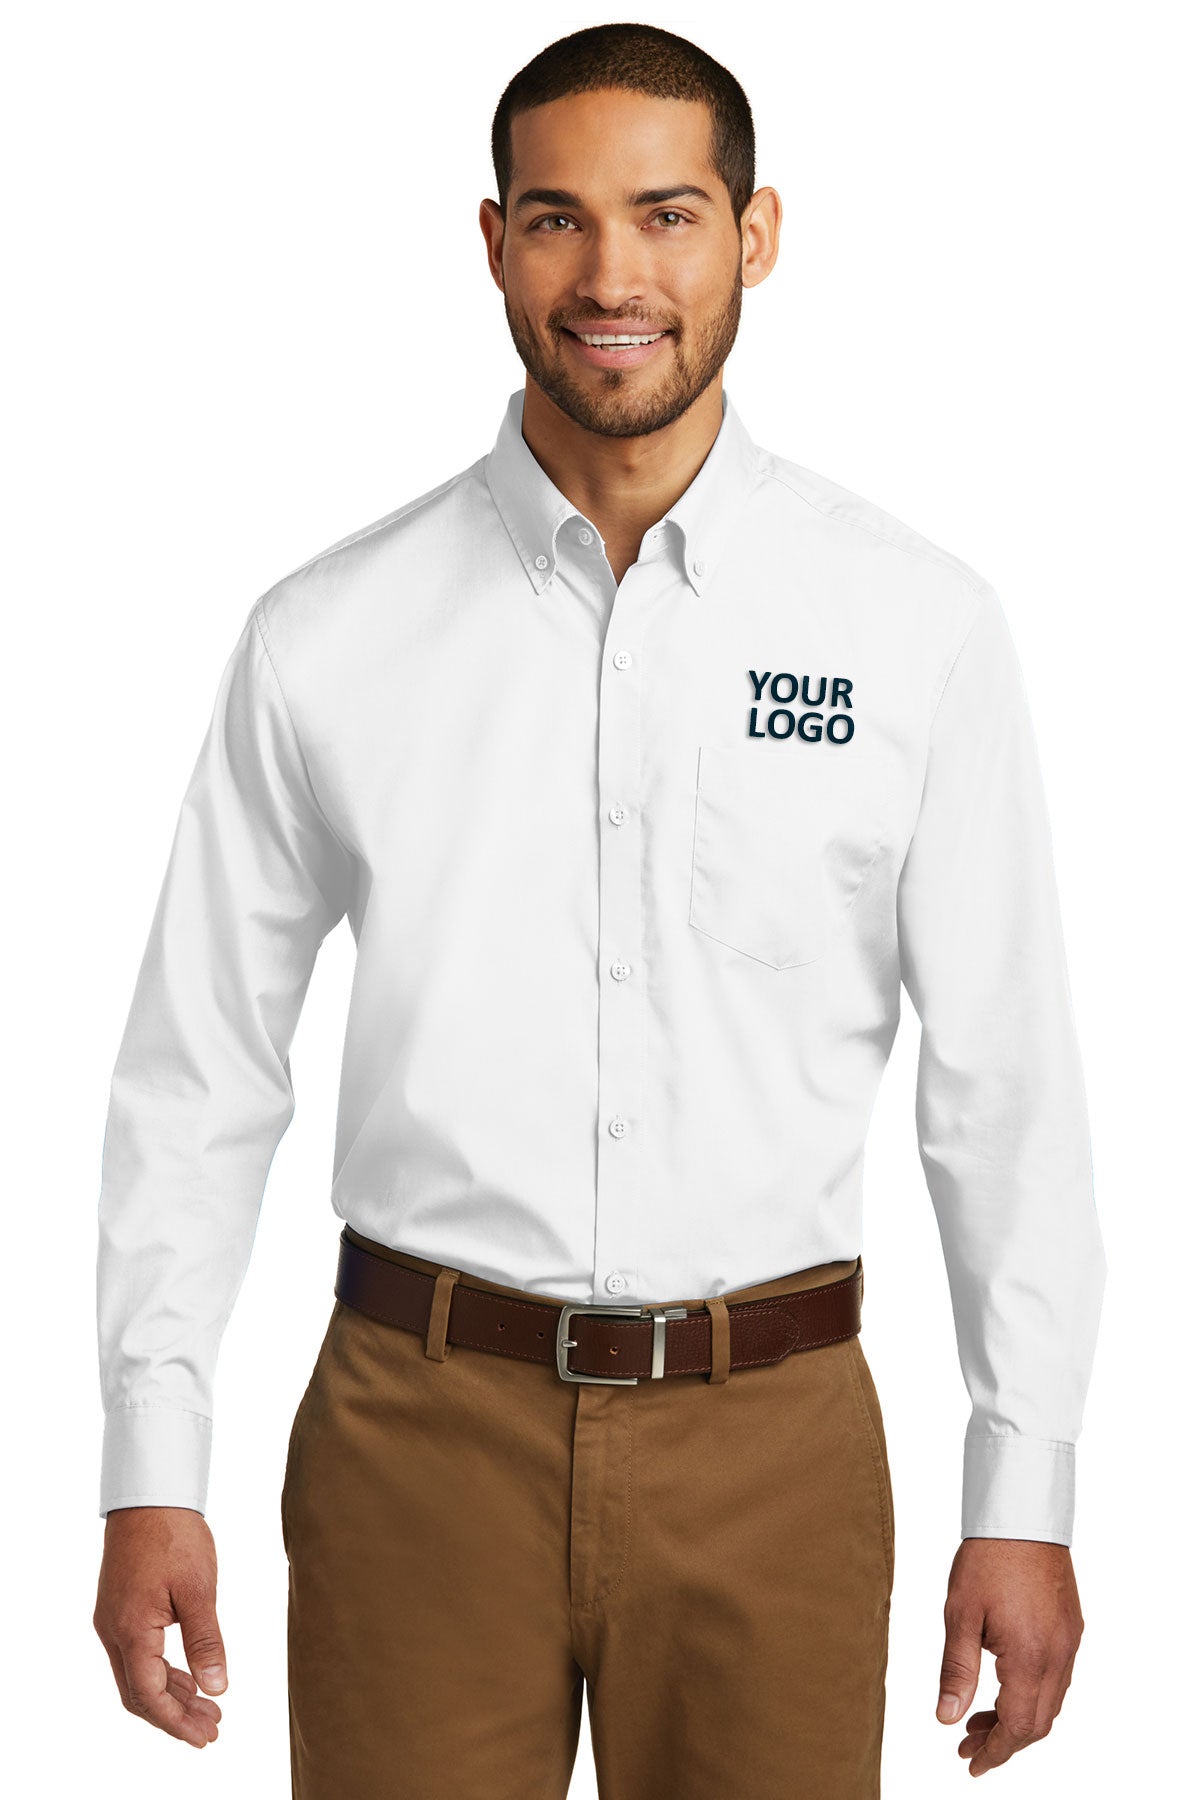 Port Authority White W100 custom embroidered shirts